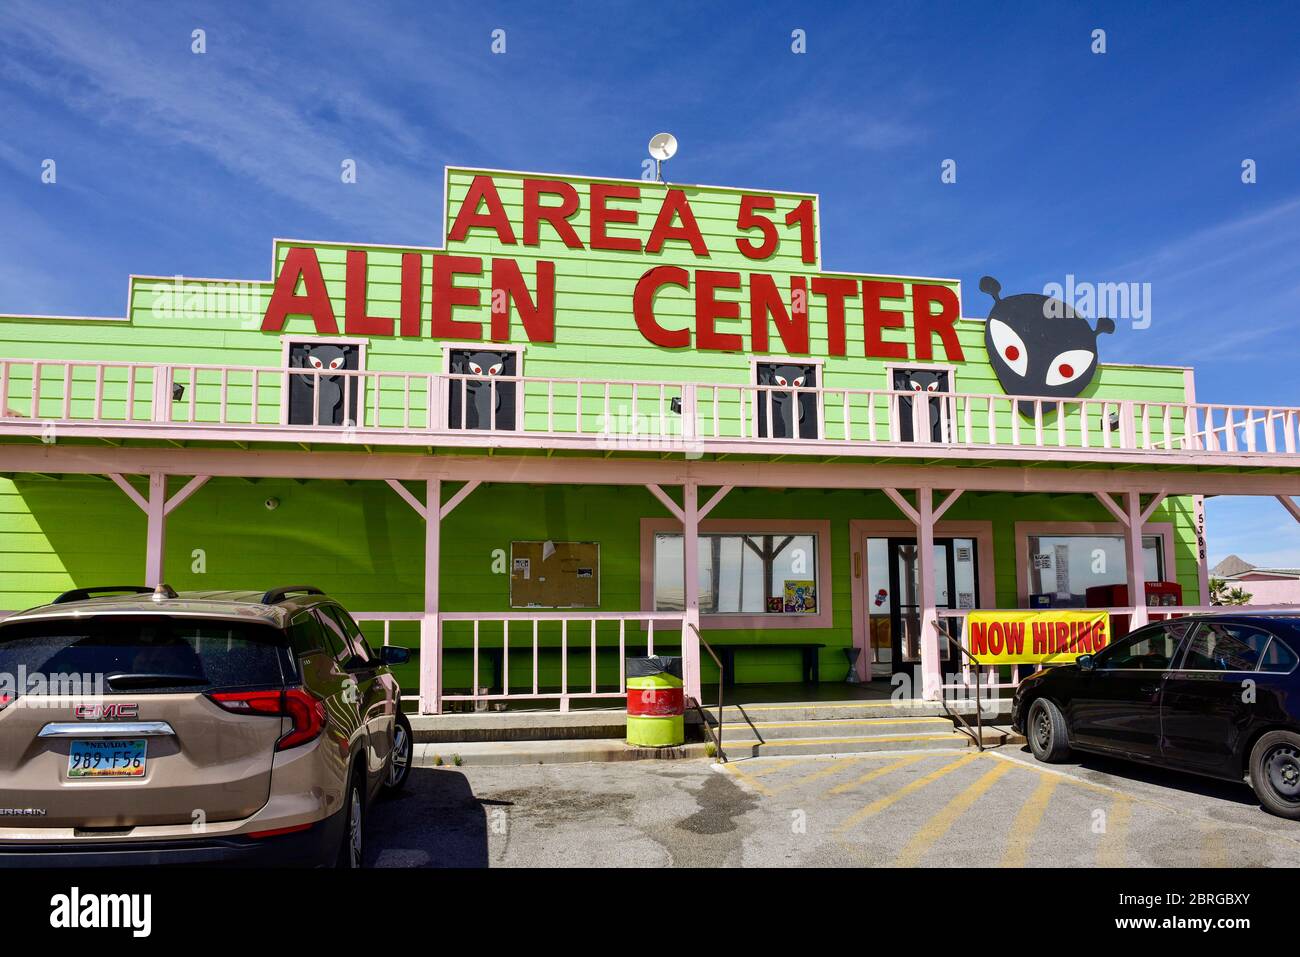 Area 51 Alien Center, a convenience store on interstate 95 in Southern Nevada, Nye County. Stock Photo